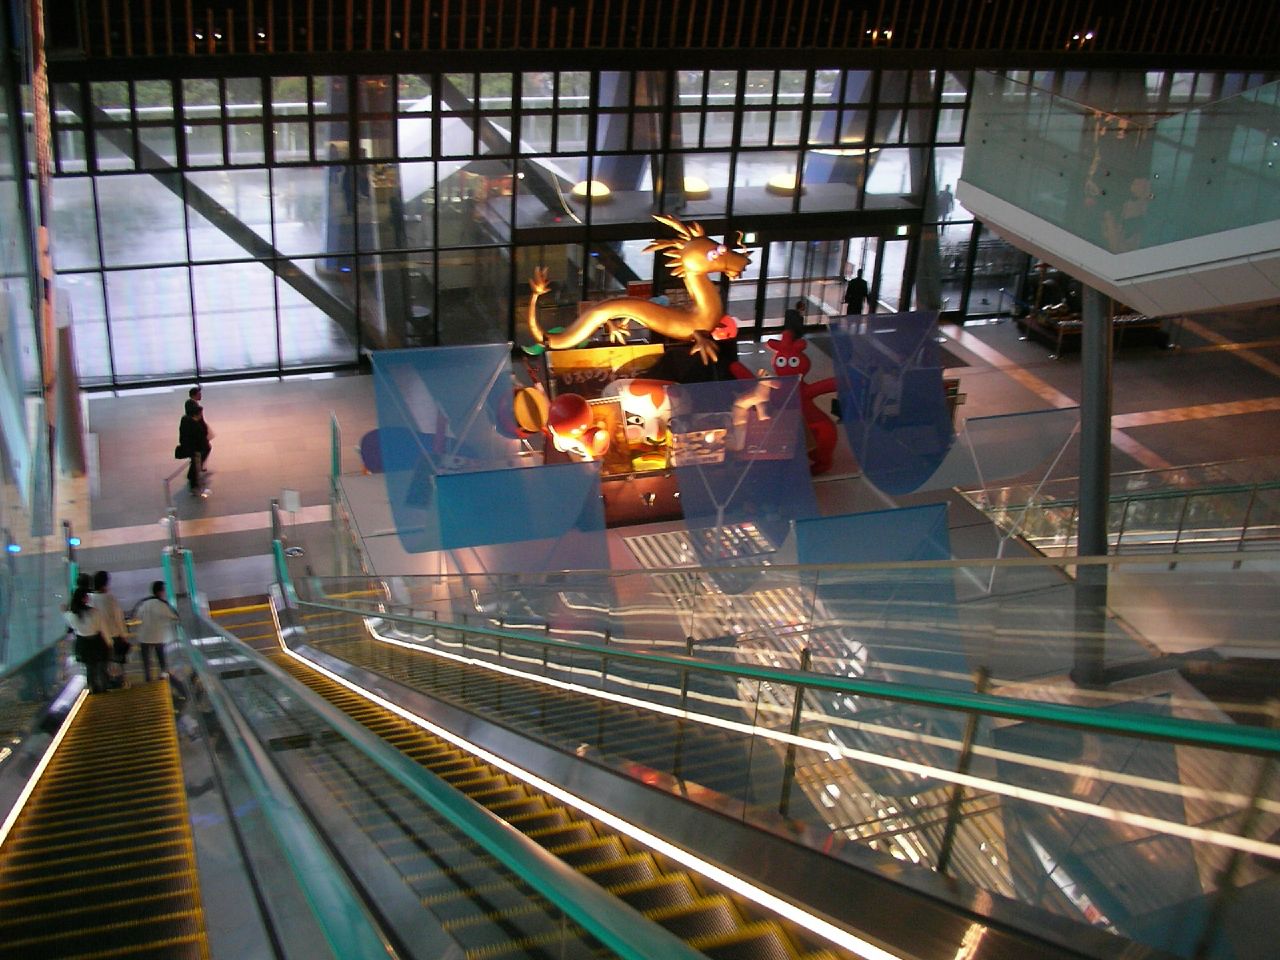 an escalator inside a building with people and sculptures